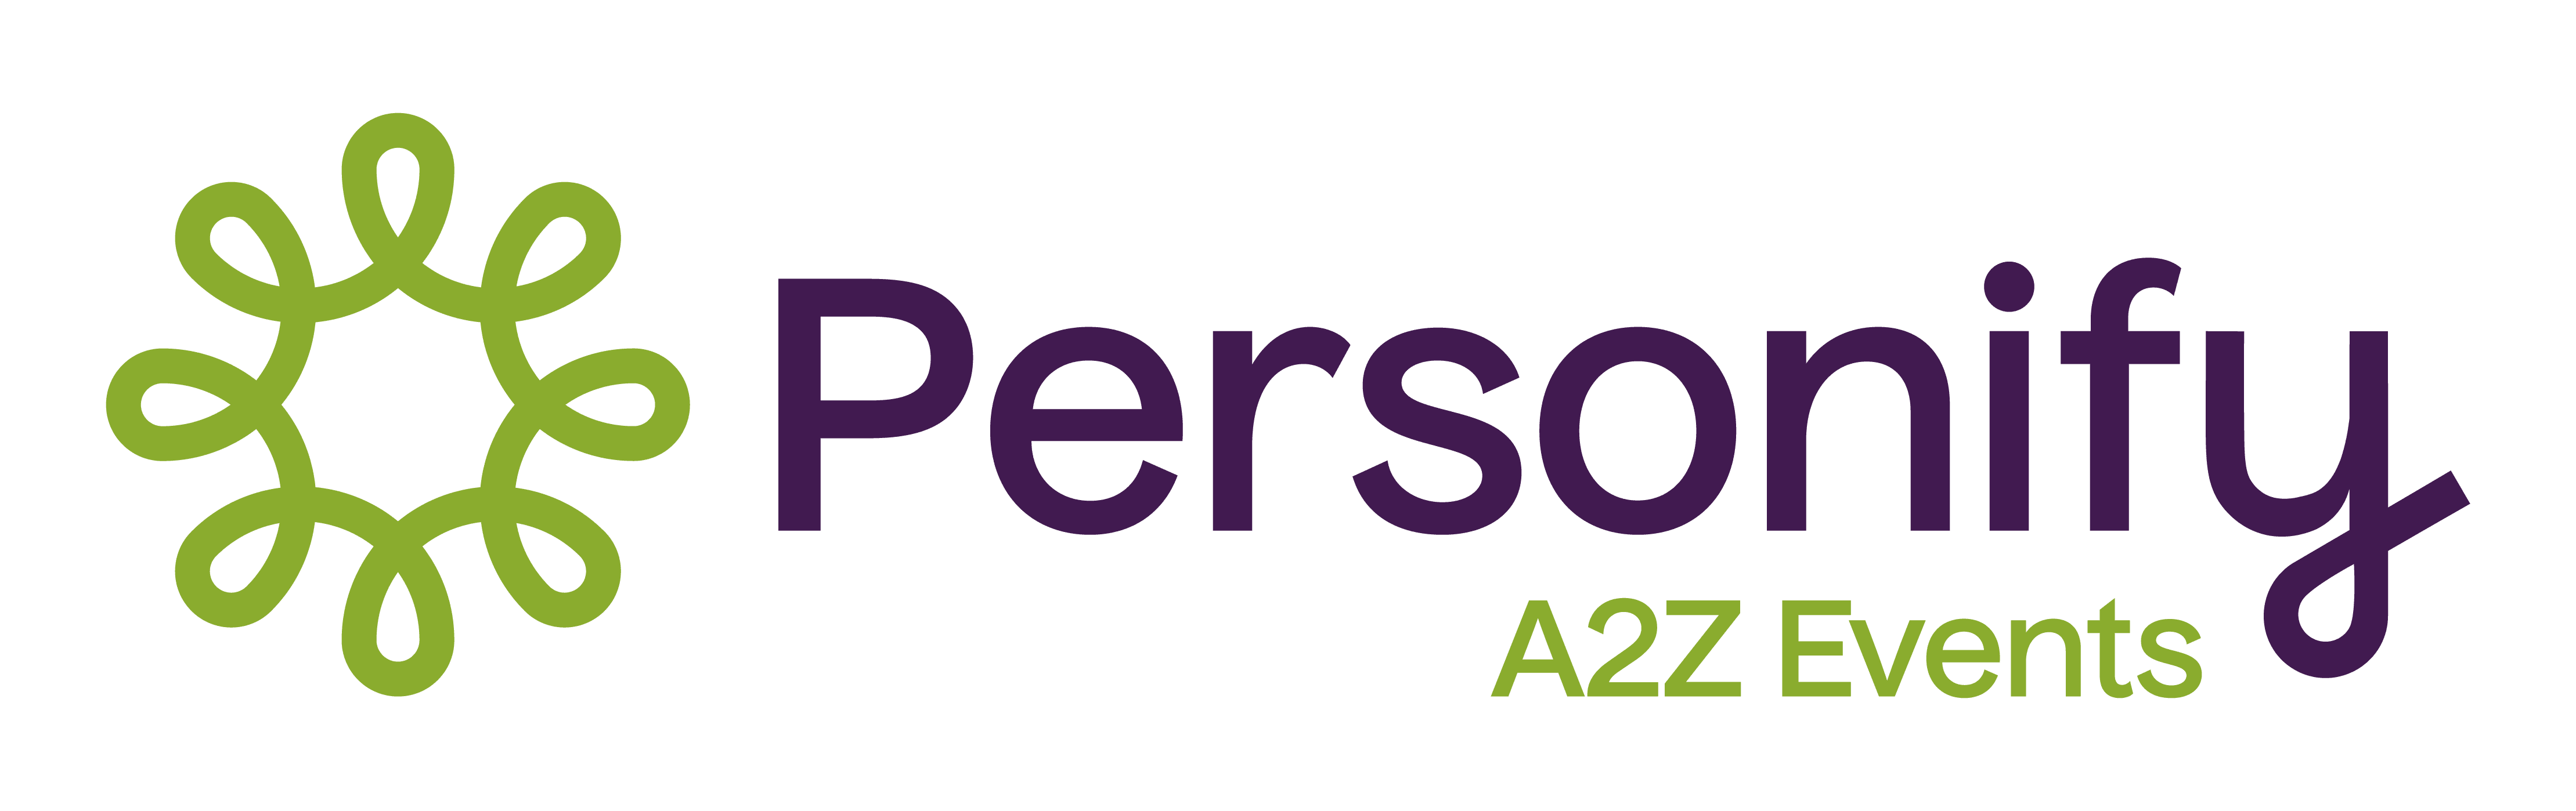 A2Z Events By Personify